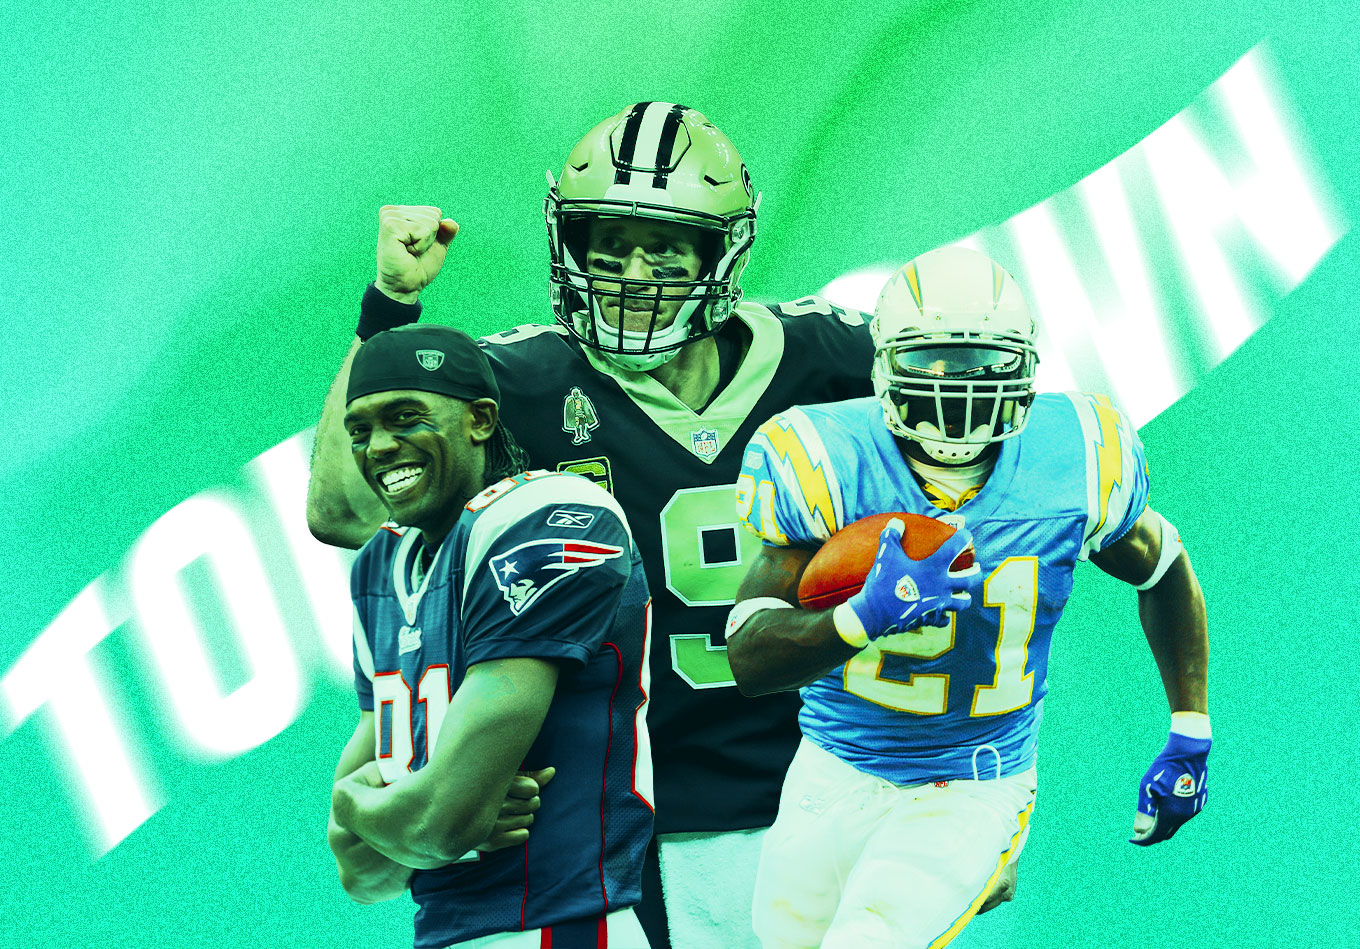 Finding Paydirt: The Most Touchdowns in a Game, Season and Postseason in NFL History